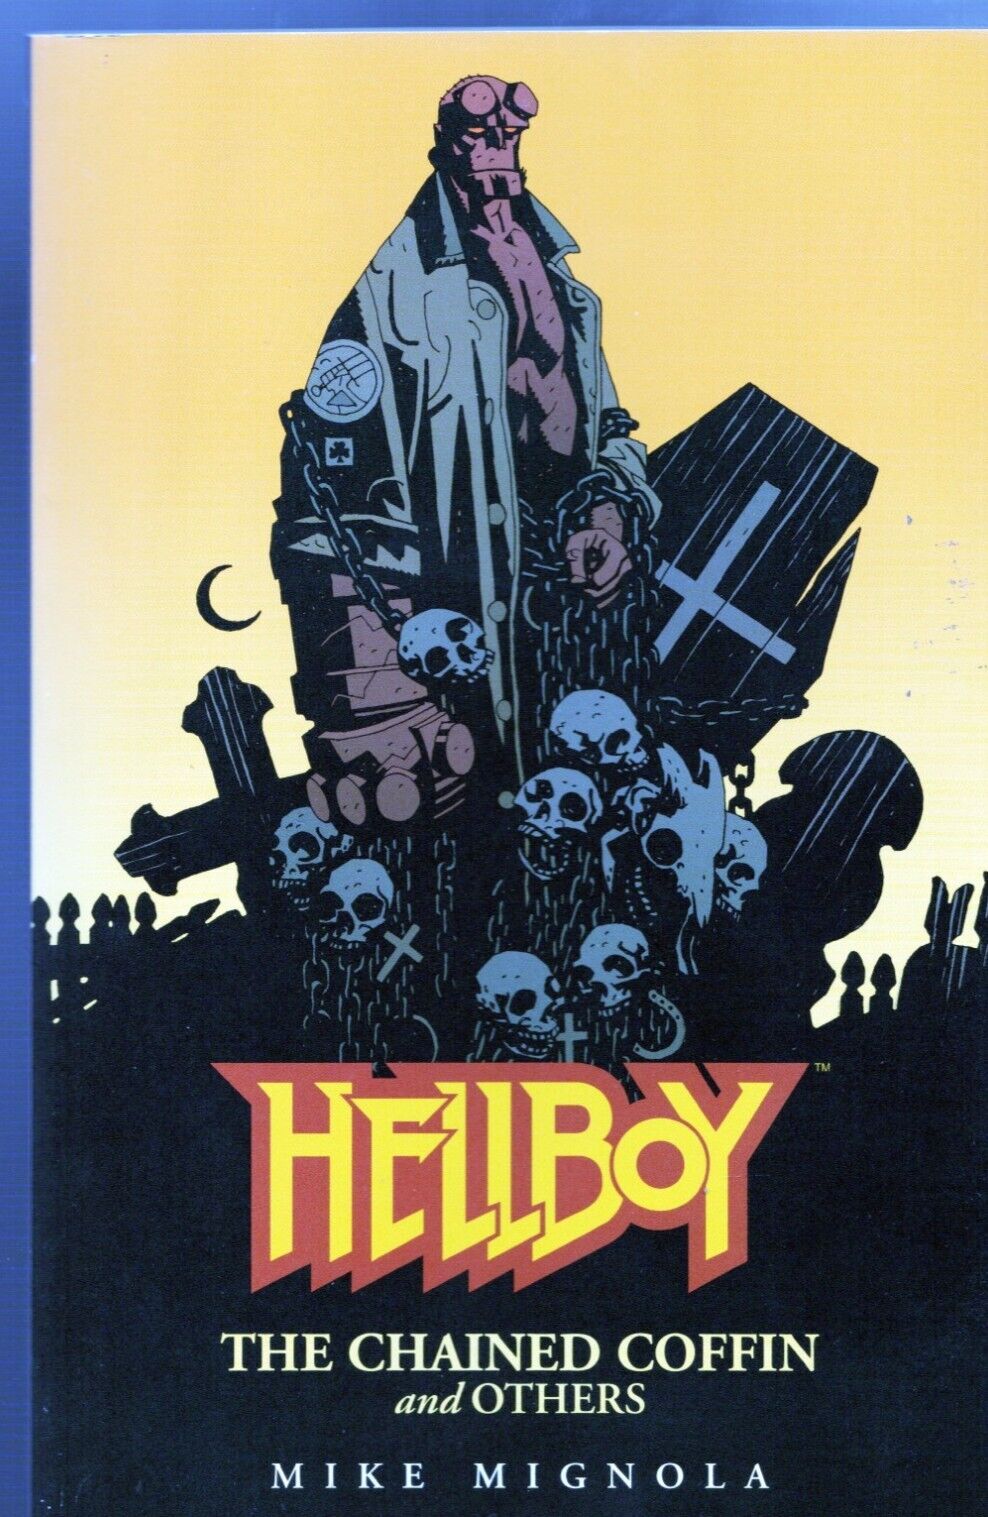 HELLBOY: THE CHAINED COFFIN AND OTHERS Mike Mignola (Dark Horse 1998 1st print)